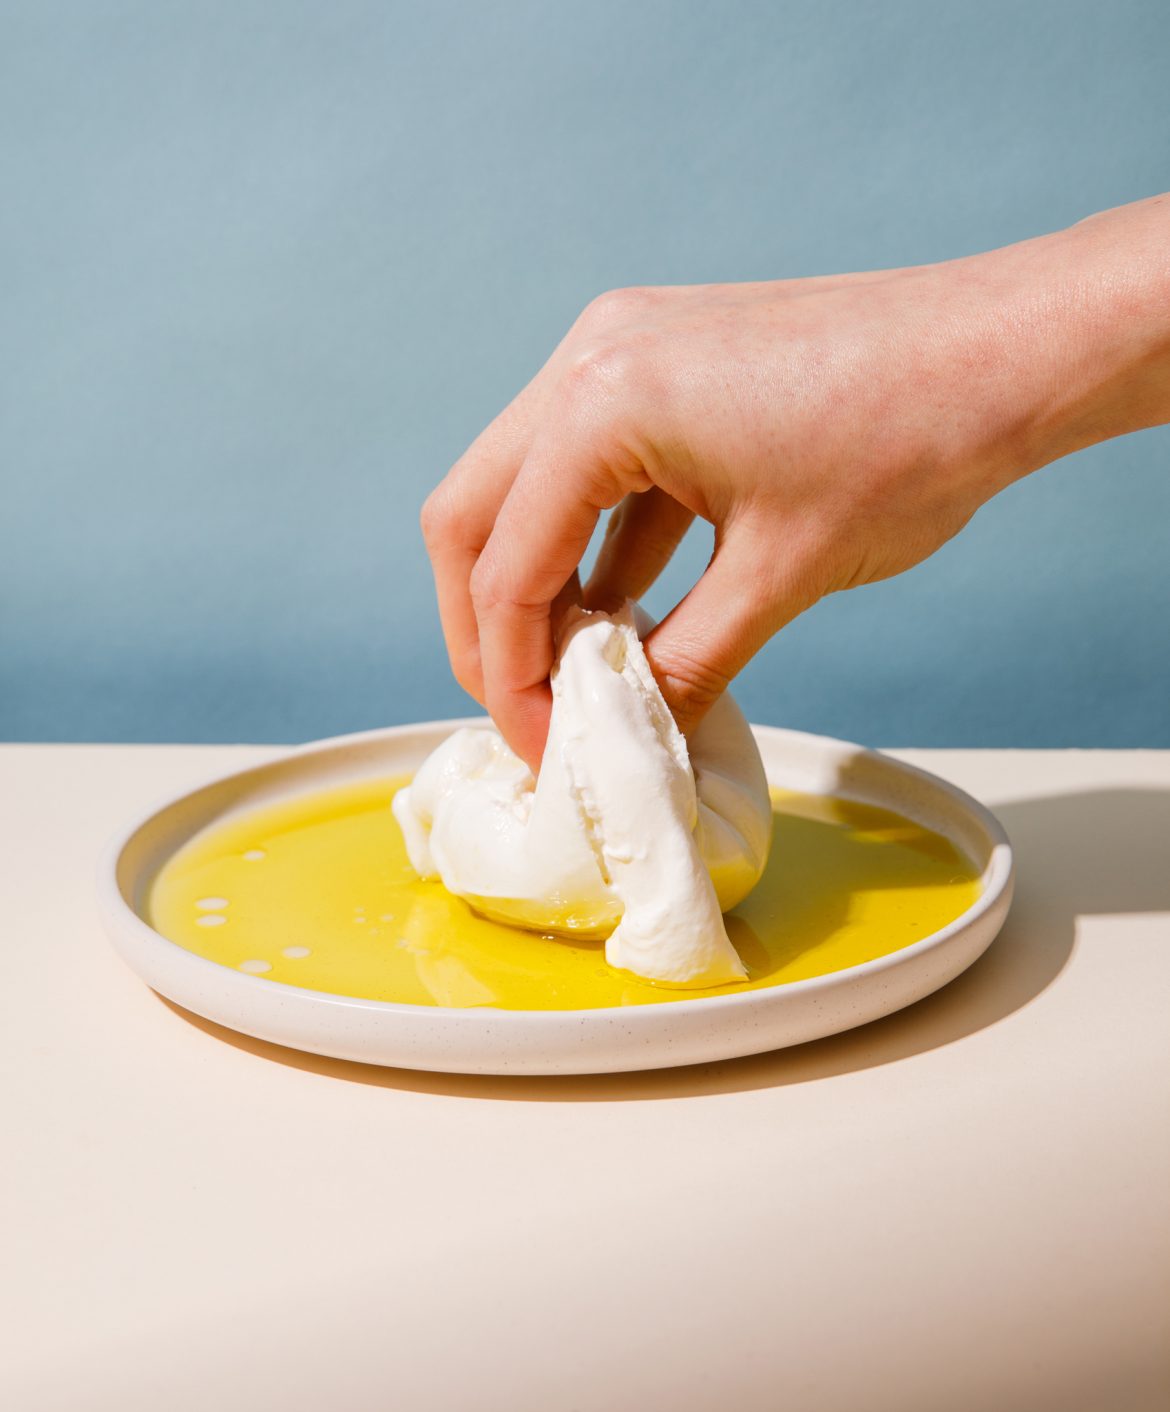 photograph of a hand grabbing a fresh burrata on a plate. Background is pale blue, hand is coming from right to left